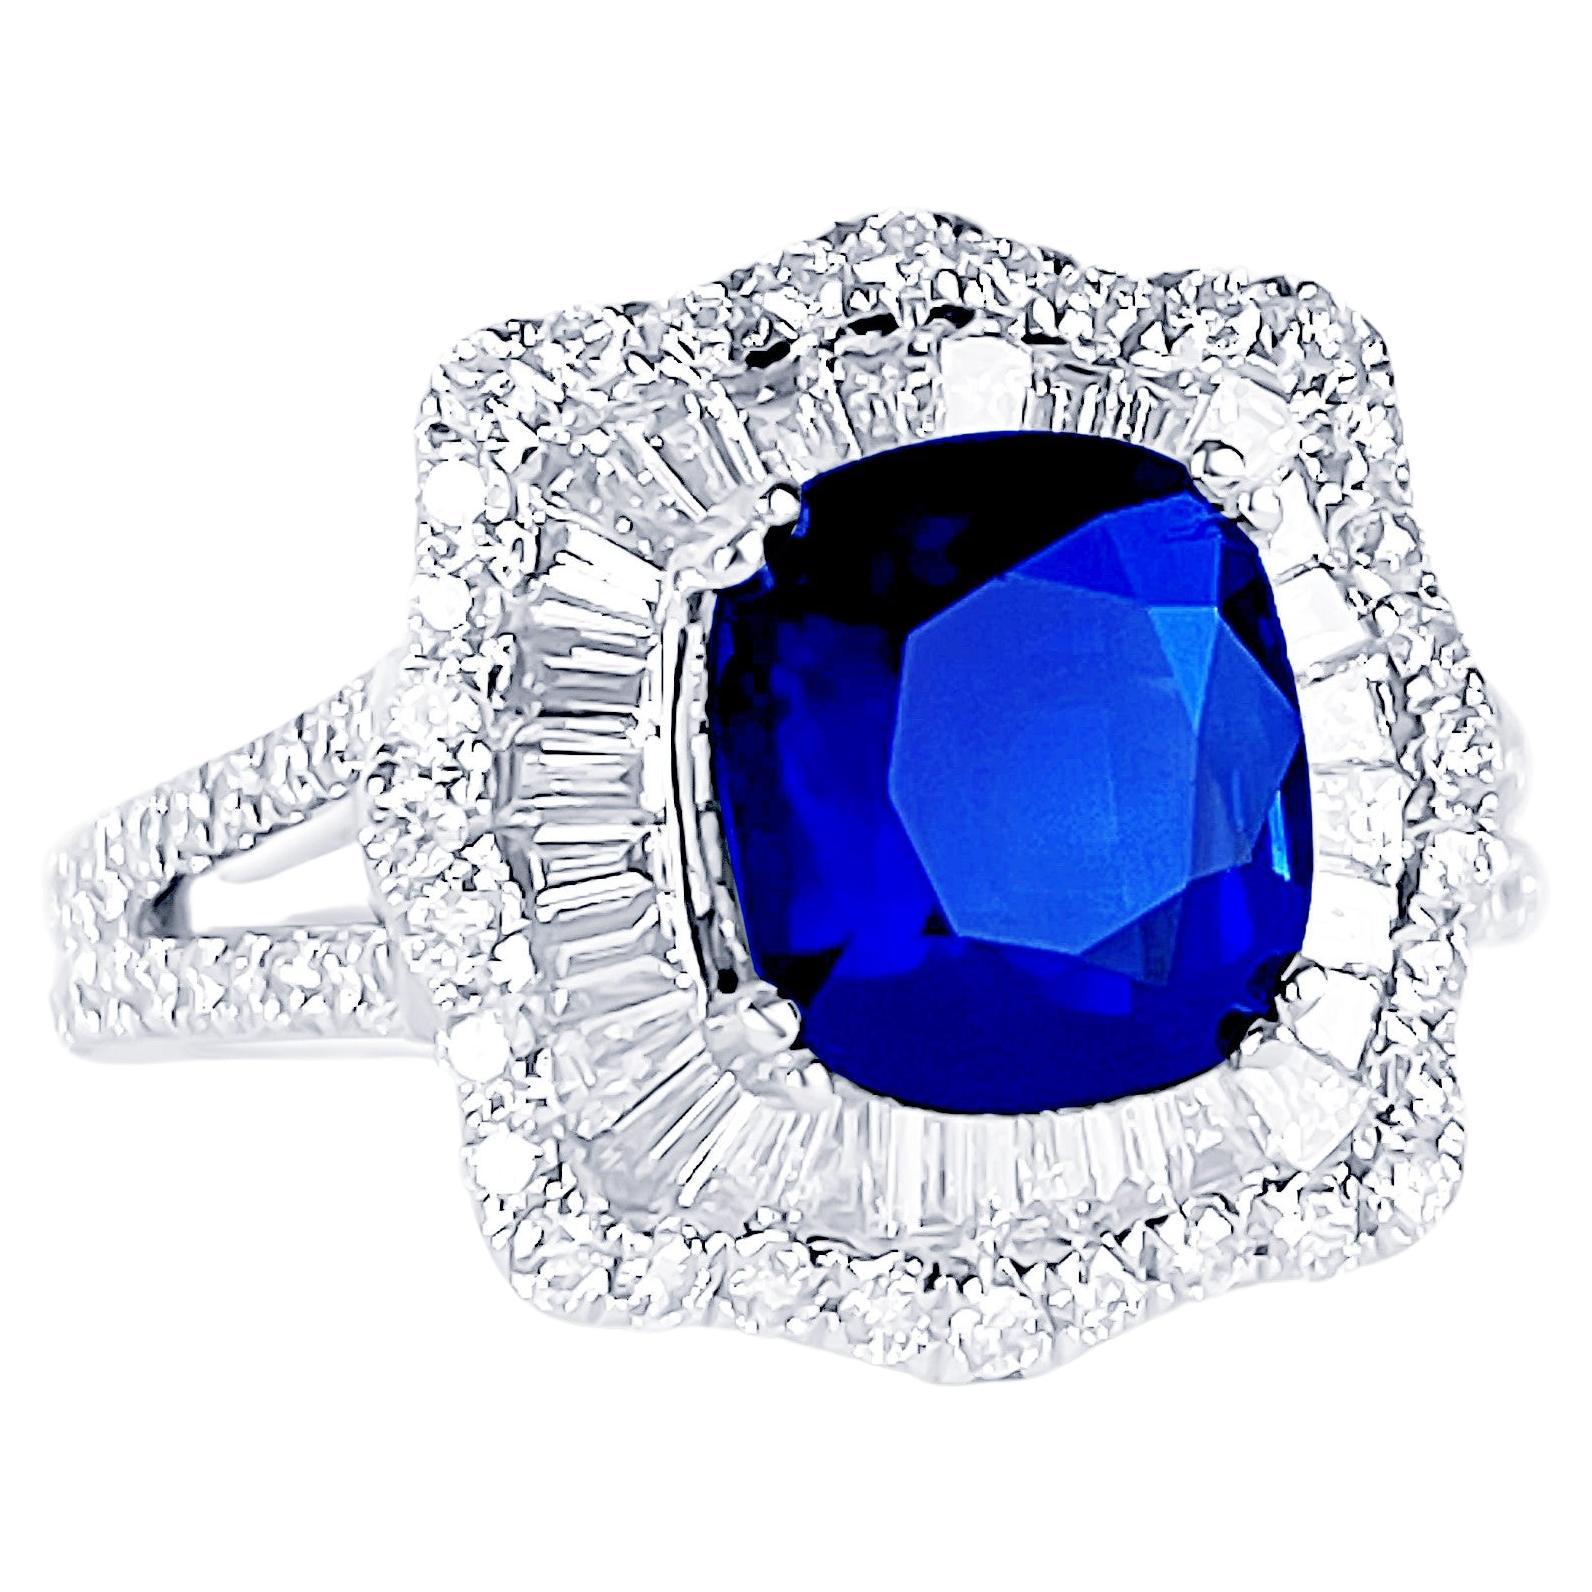 GIA Certified 3.55 Carat Royal Blue Burma Natural Sapphire Diamond Cocktail Ring For Sale